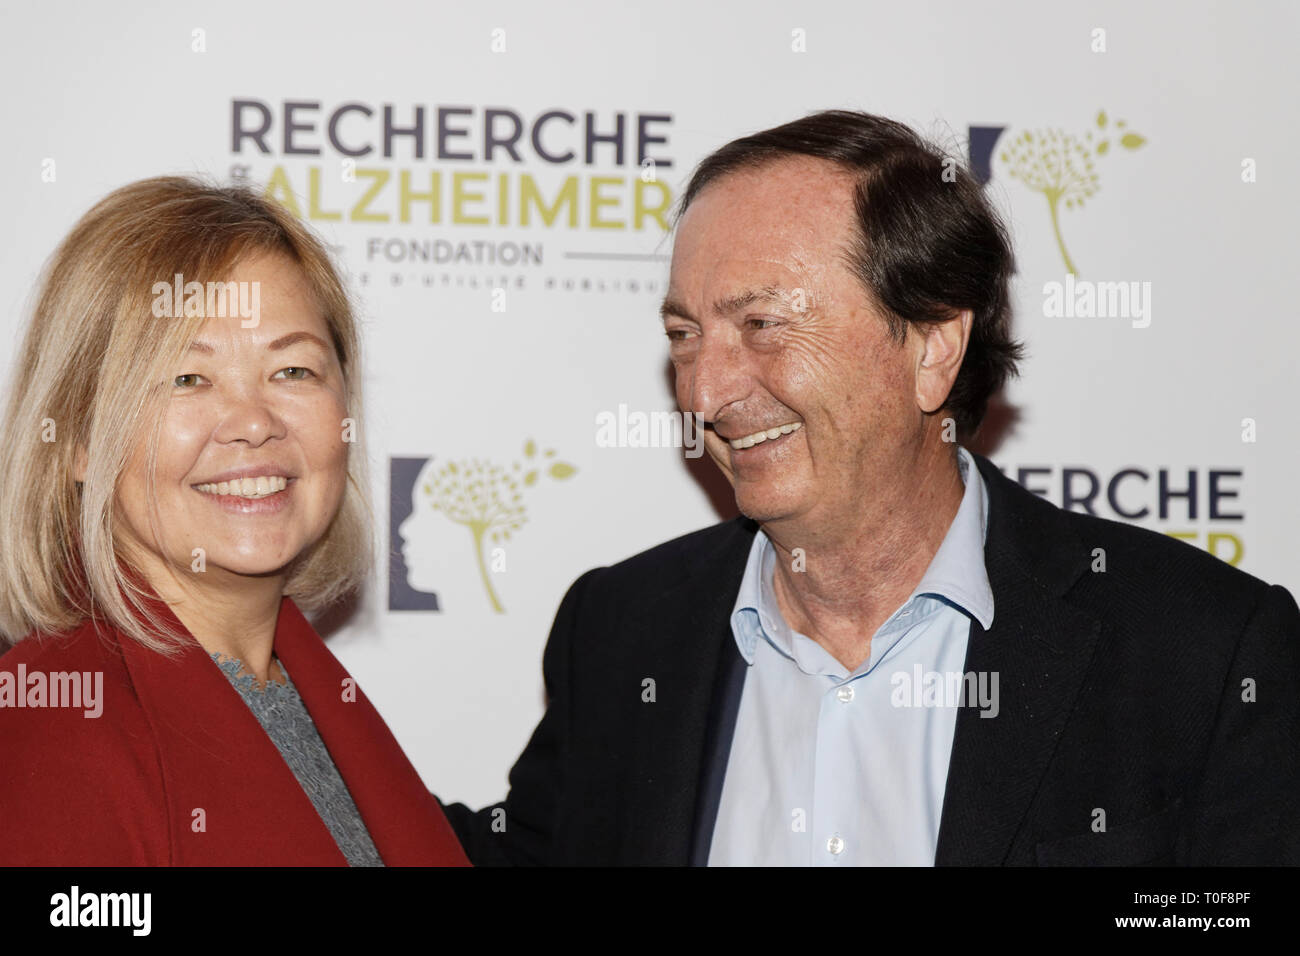 Paris, France. 18th Mar 2019. Michel Edouard Leclerc and Natalia Olzoeva - Photocall of the 14th Gala 2019 of the Association for Alzheimer Research at the Olympia in Paris on March 18, 2019, France Credit: Véronique PHITOUSSI/Alamy Live News Stock Photo